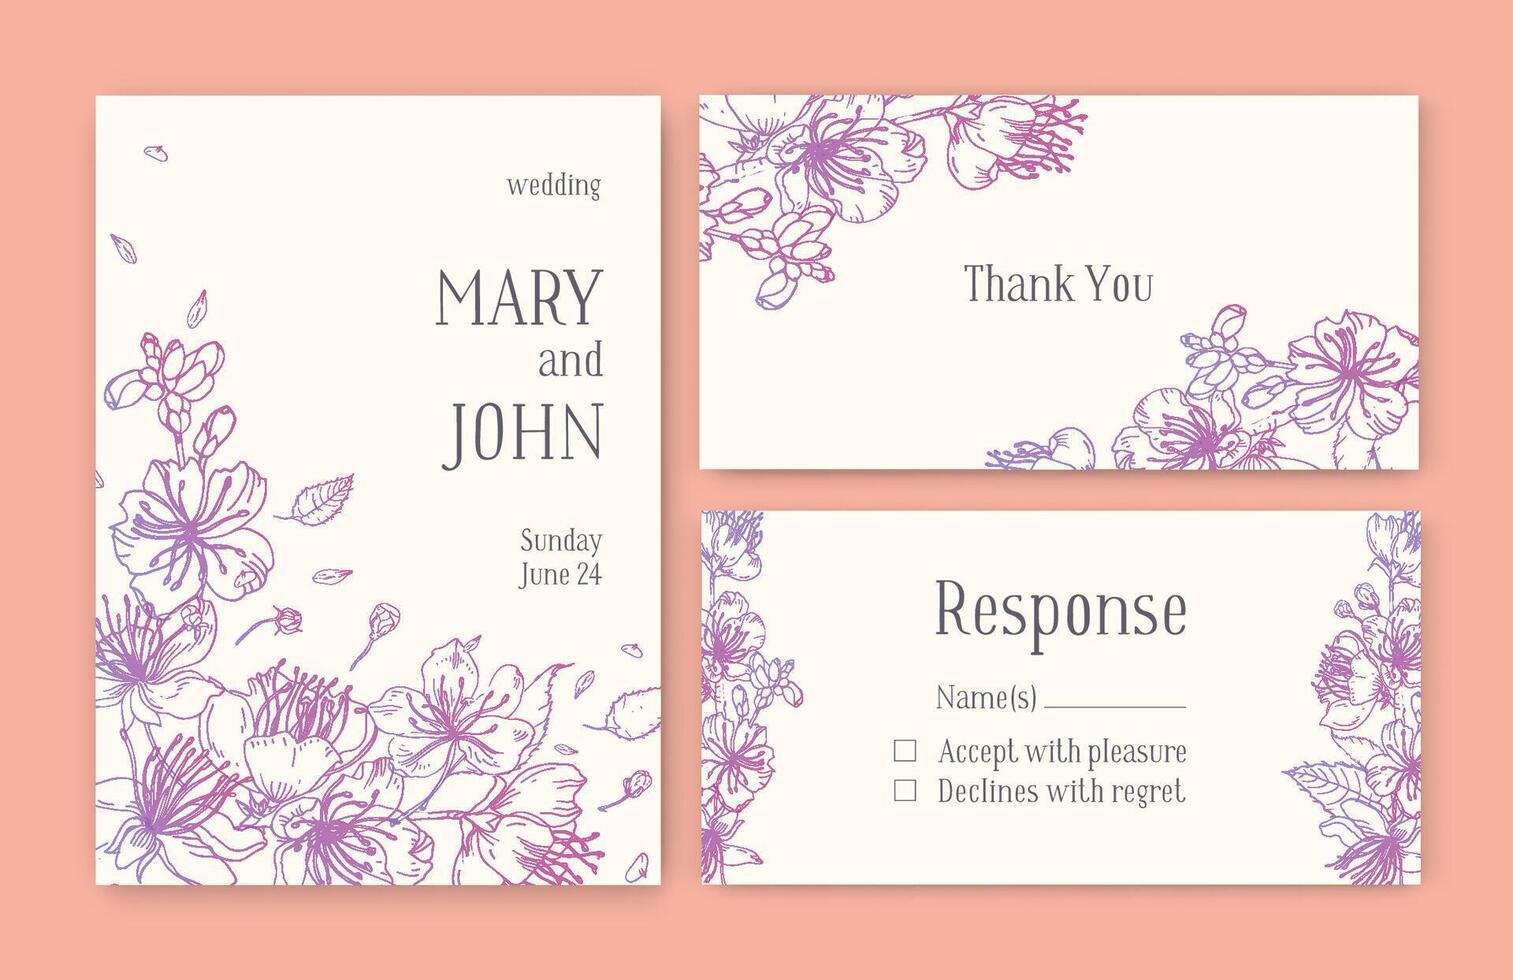 Set of gorgeous templates for Save the Date card, wedding invitation or thank you note with Japanese sakura flowers hand drawn with pink contour lines on light background. Floral vector illustration.